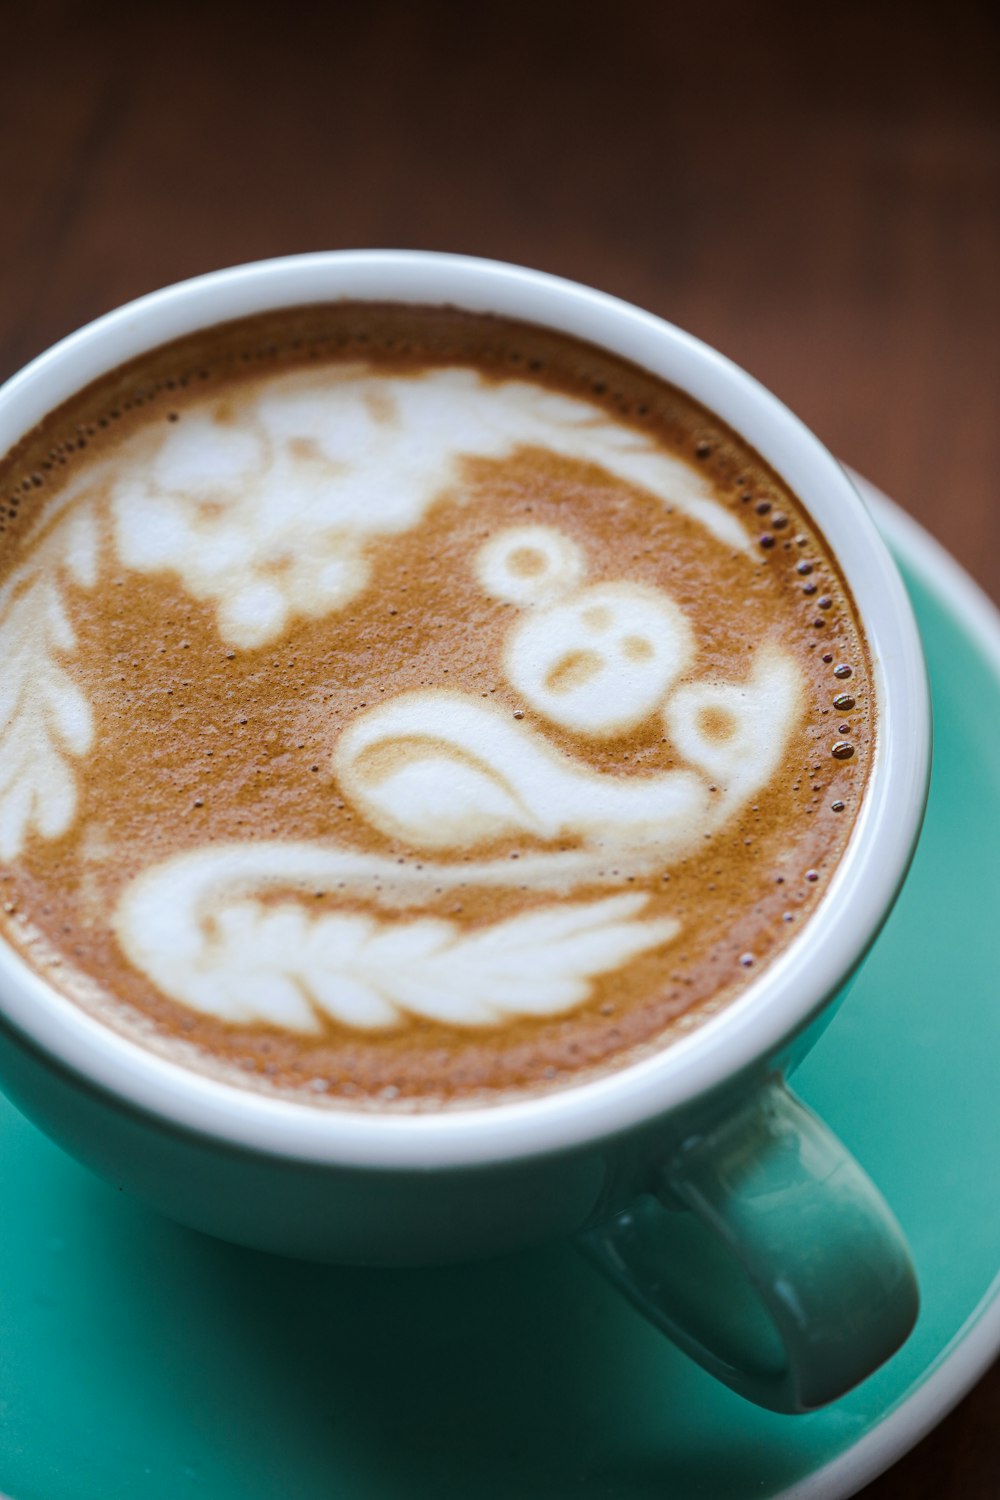 a cup of coffee with a face drawn on it